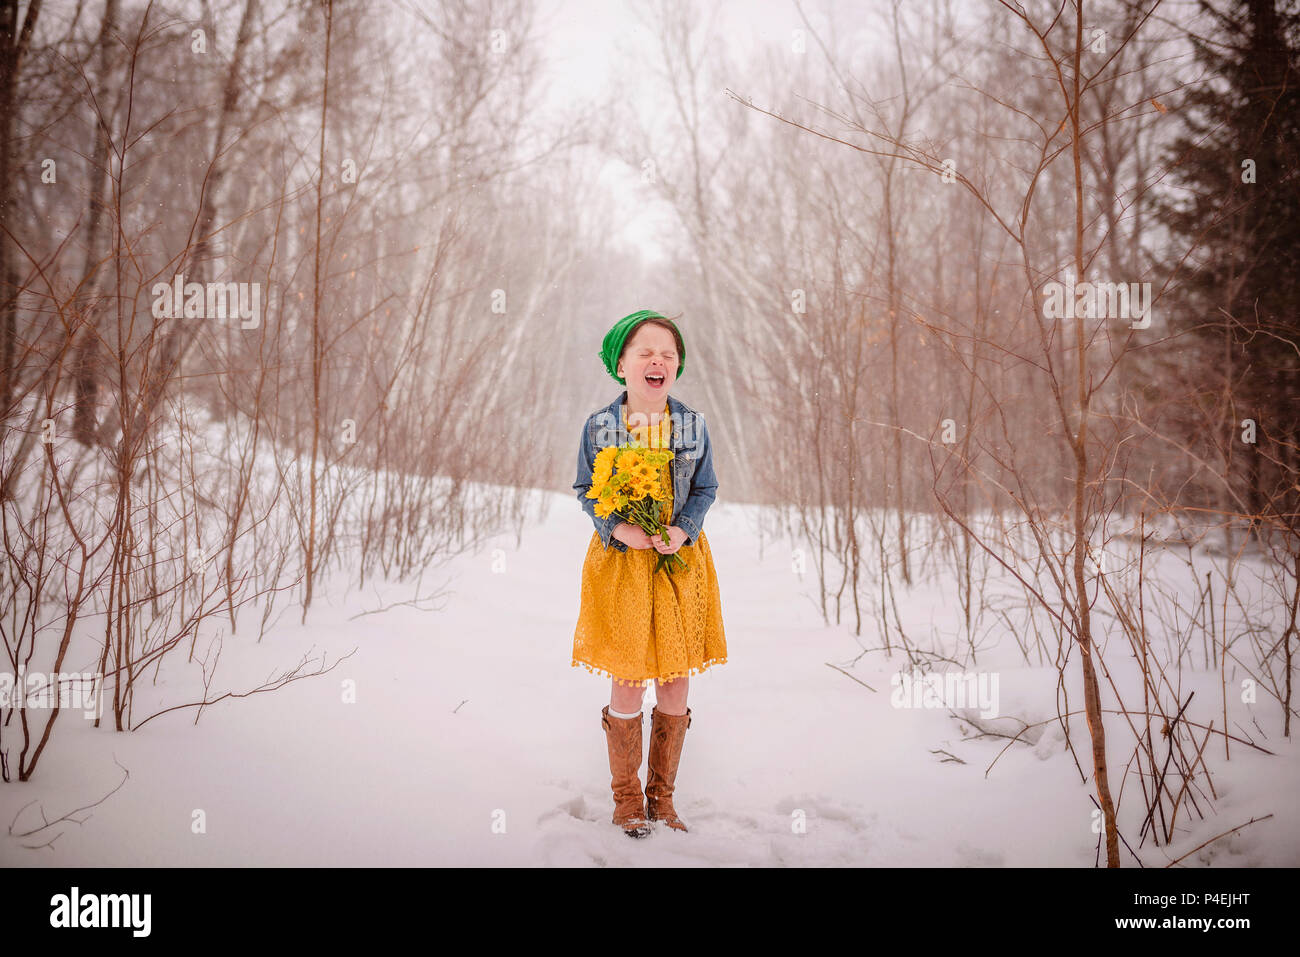 Smiling girl standing in the snow holding a bunch of yellow flowers Stock Photo